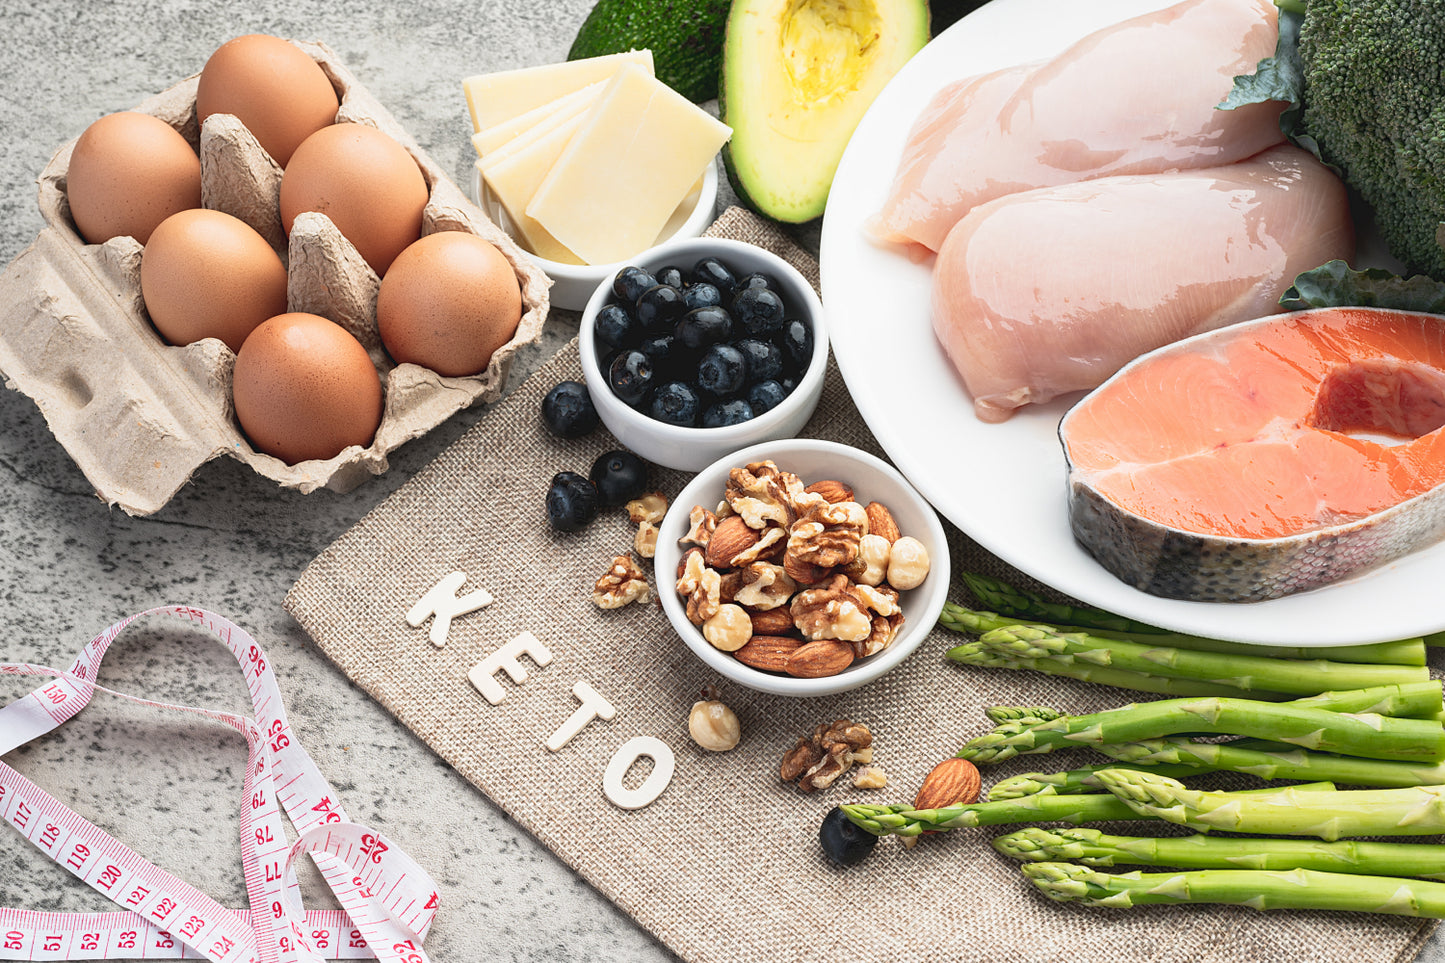 Keto for Women Over 50: 7 Tips to Make It Work